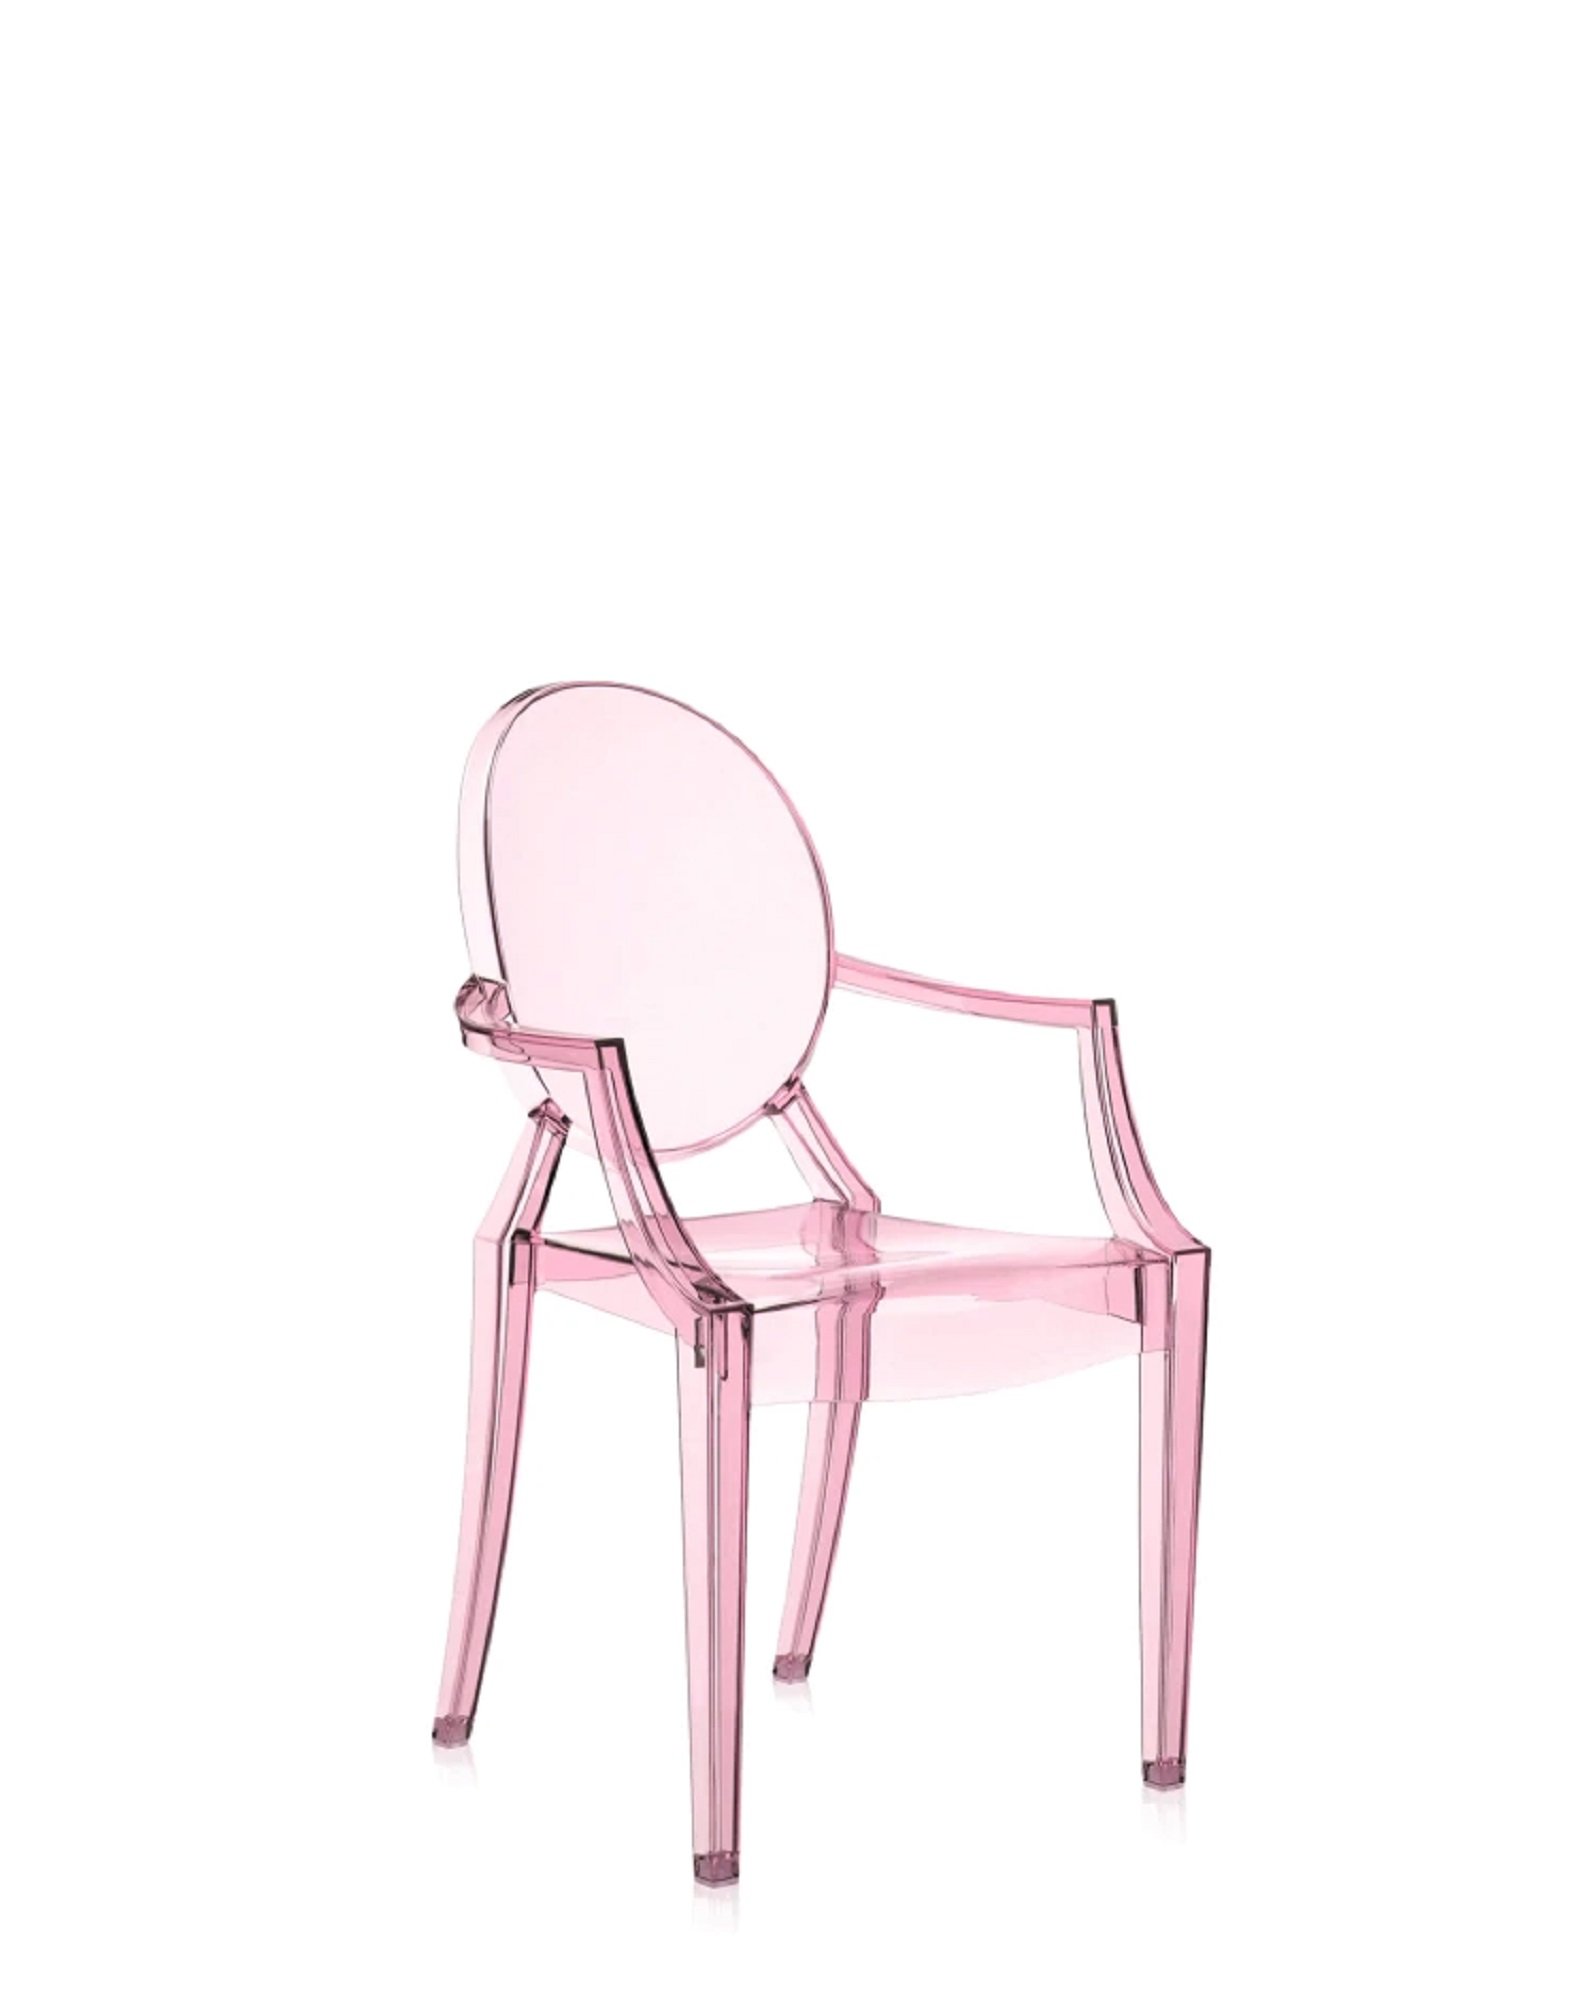 Lou Lou Ghost Kids Chair from Kartell, designed by Philippe Starck